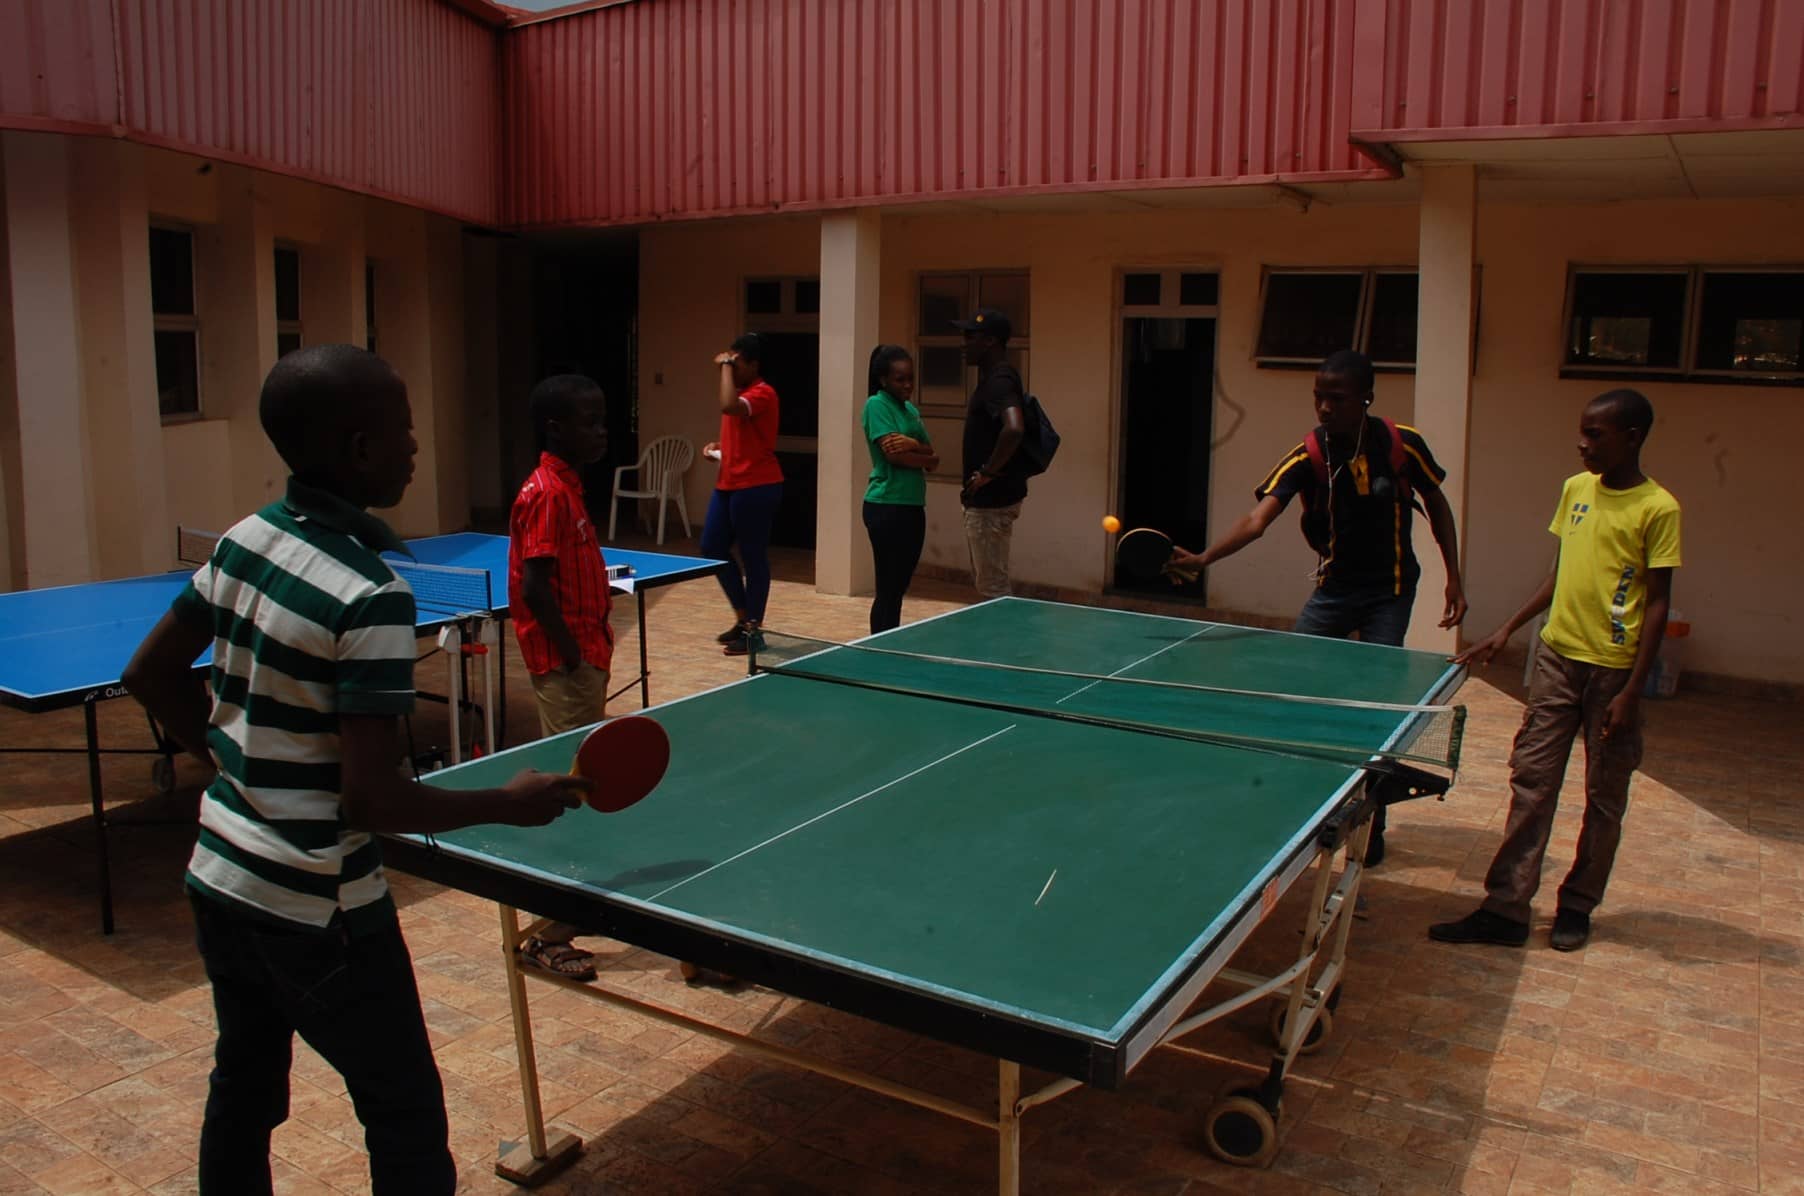 Participants of different ages also competed for prizes in table tennis